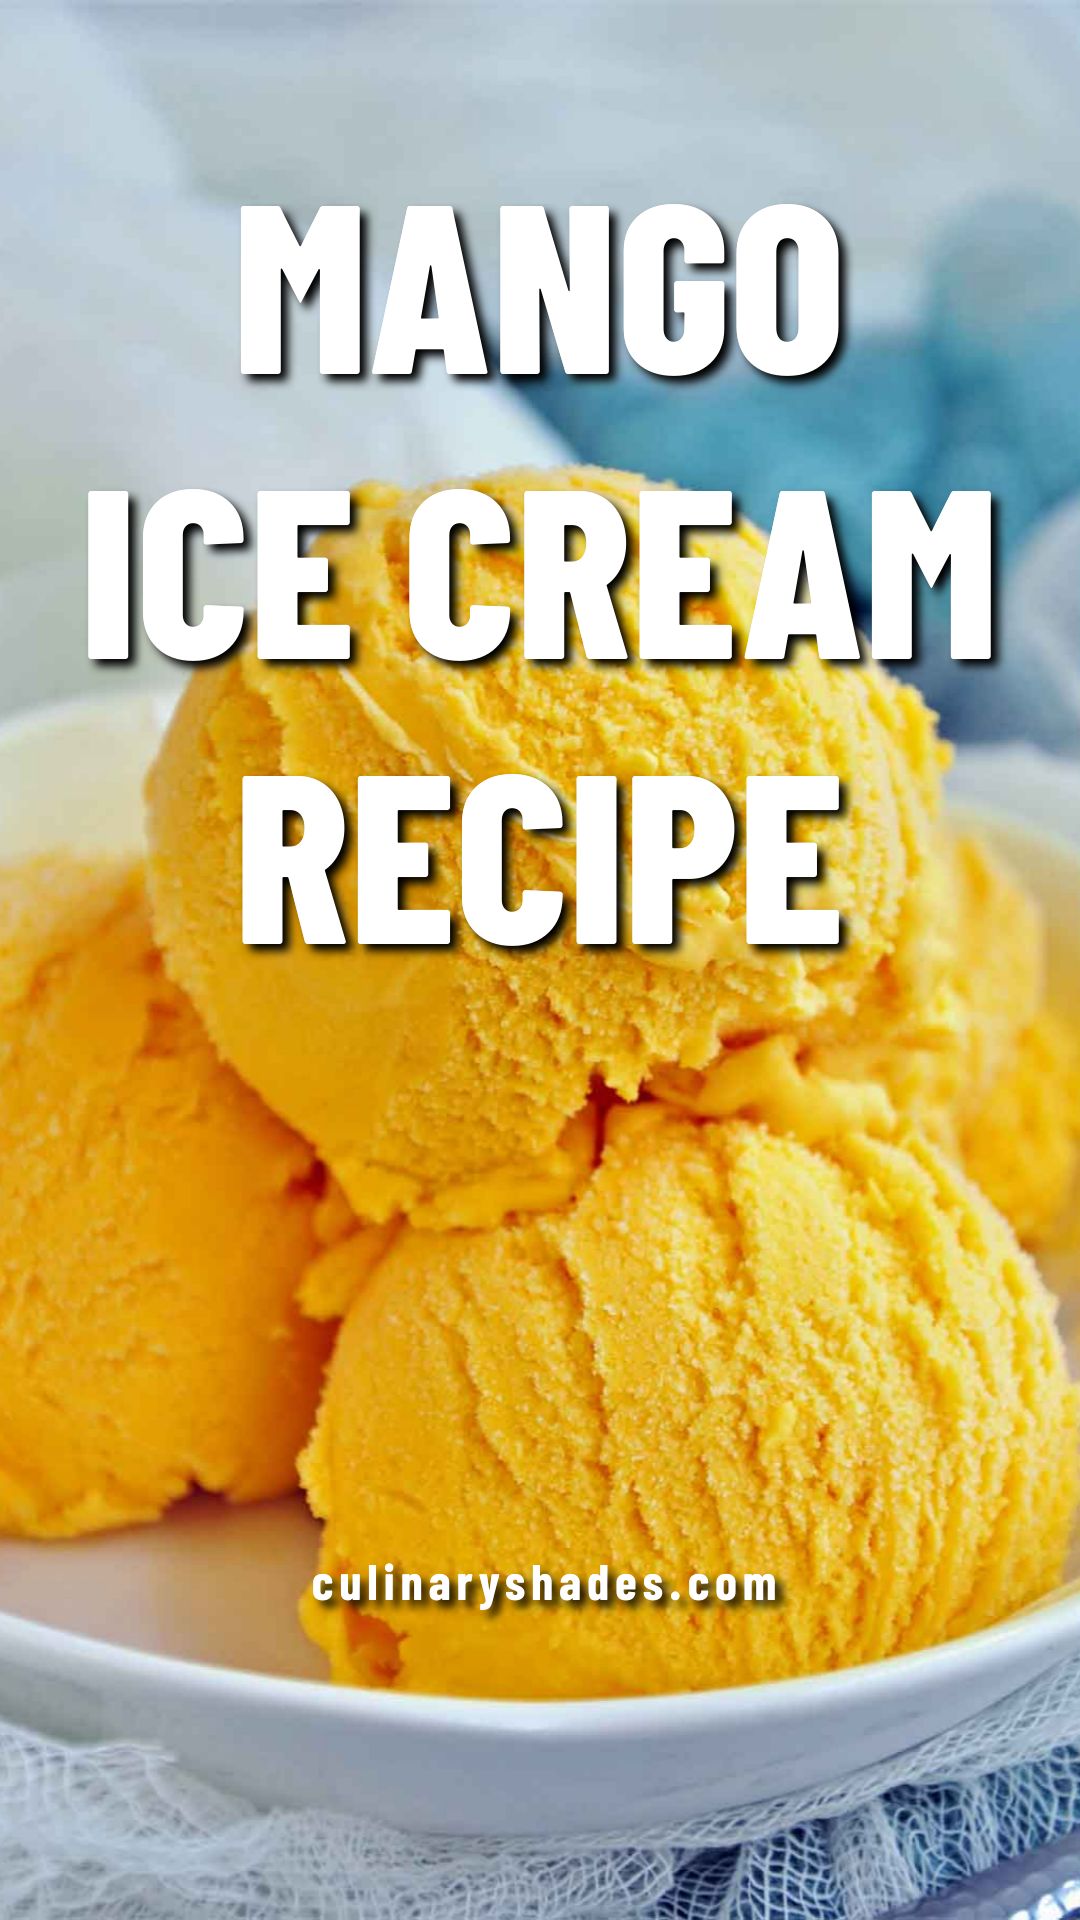 Mango ice cream scoops in a bowl.